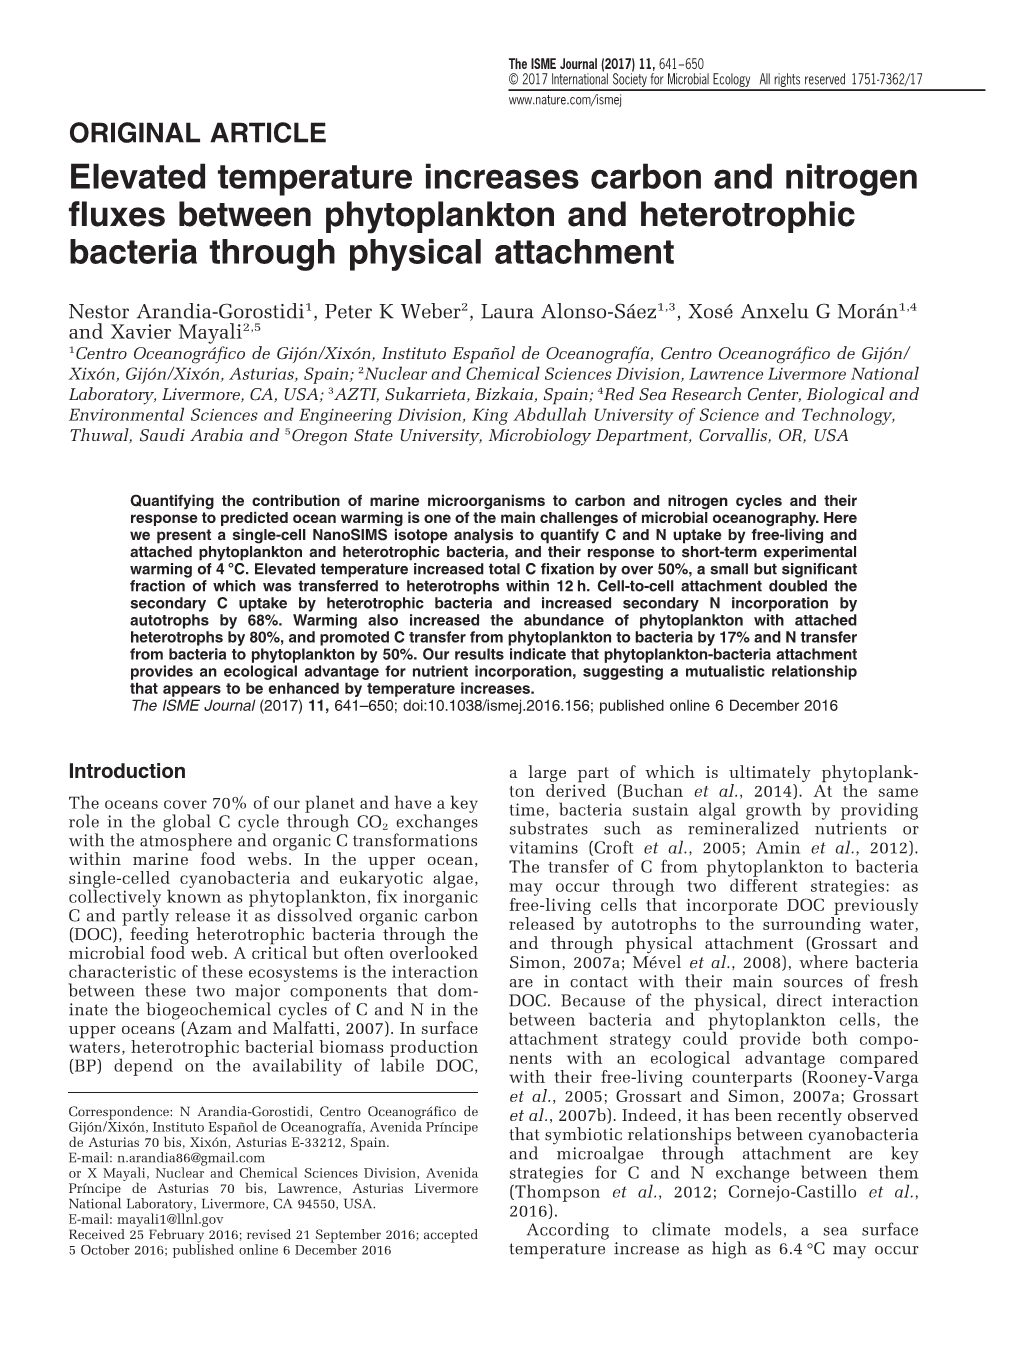 Elevated Temperature Increases Carbon and Nitrogen Fluxes Between Phytoplankton and Heterotrophic Bacteria Through Physical Attachment